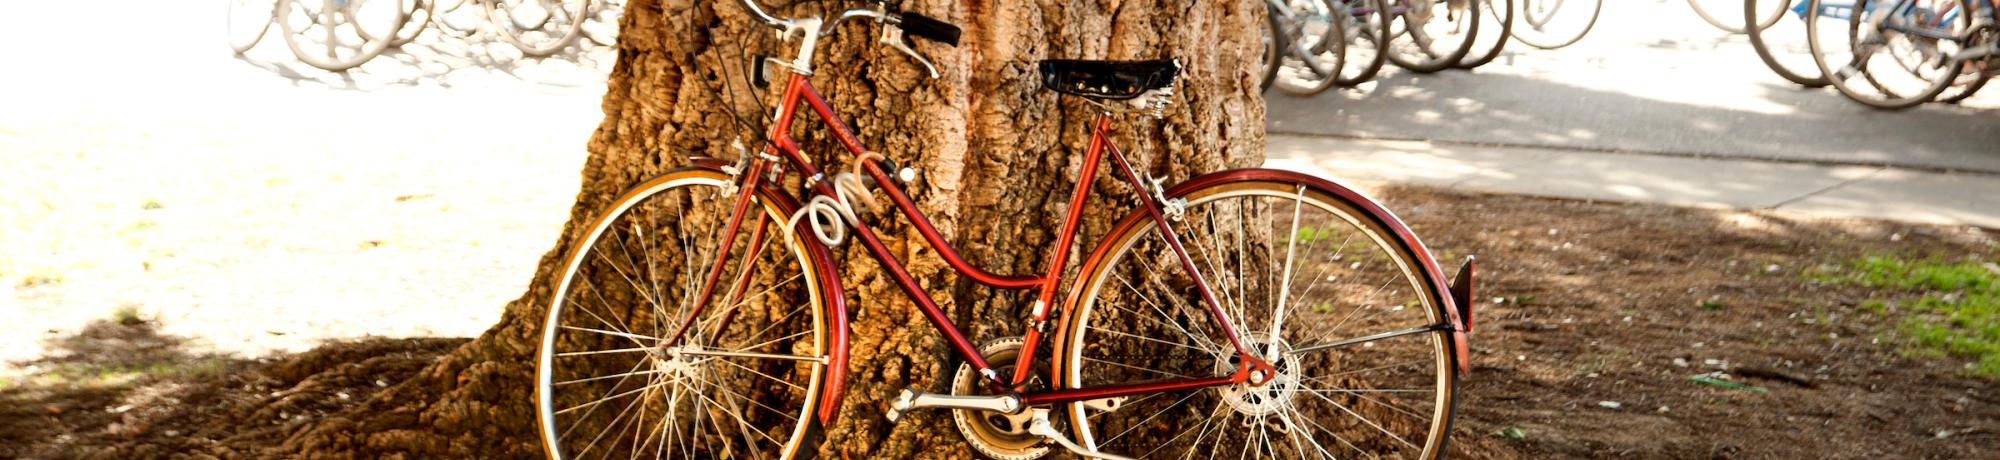 Red bicycle leaning against a tree trunk